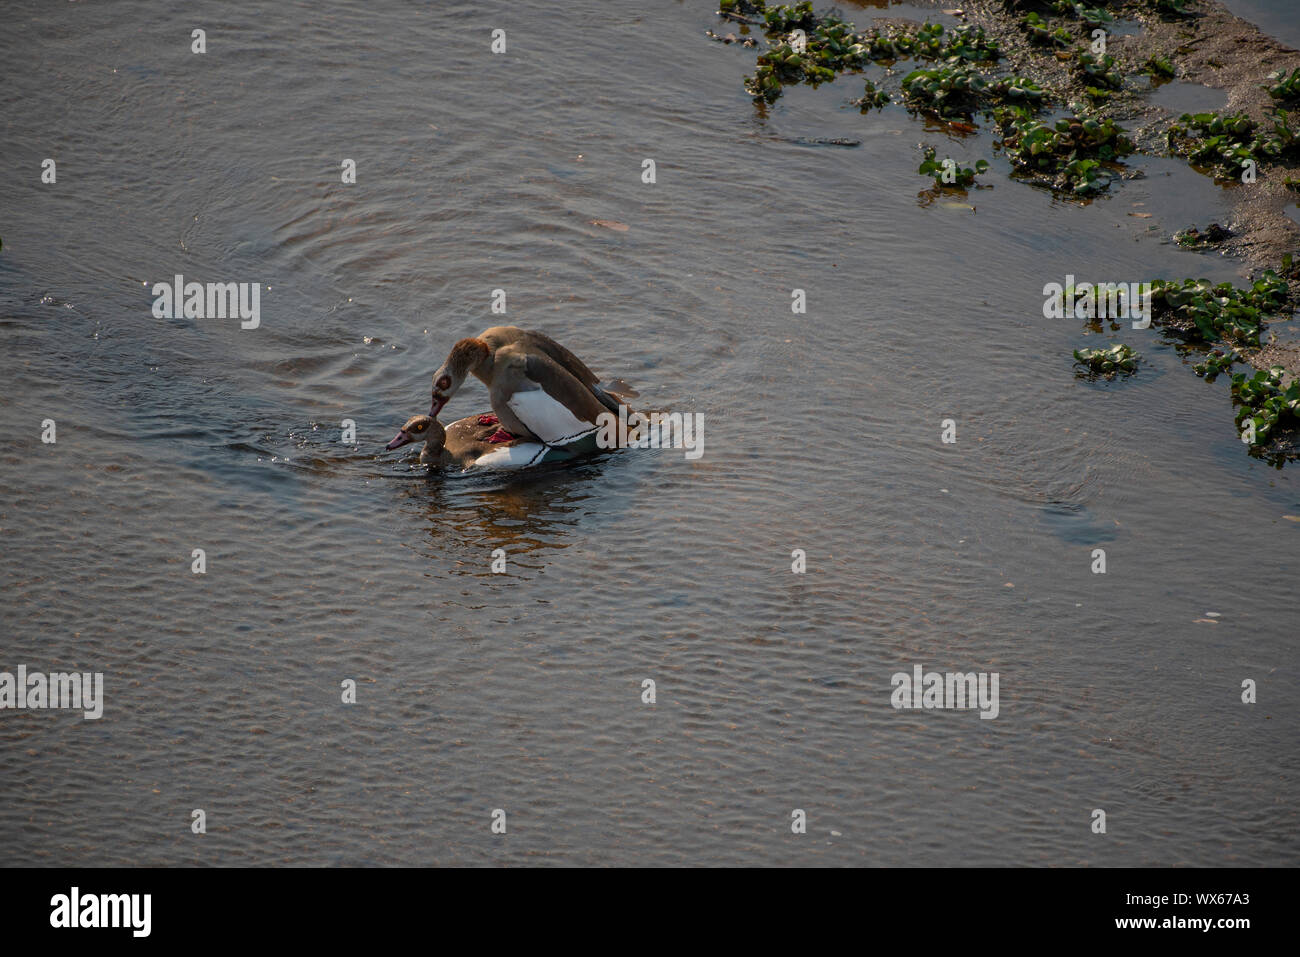 Egyptian geese mating in shallow water Stock Photo